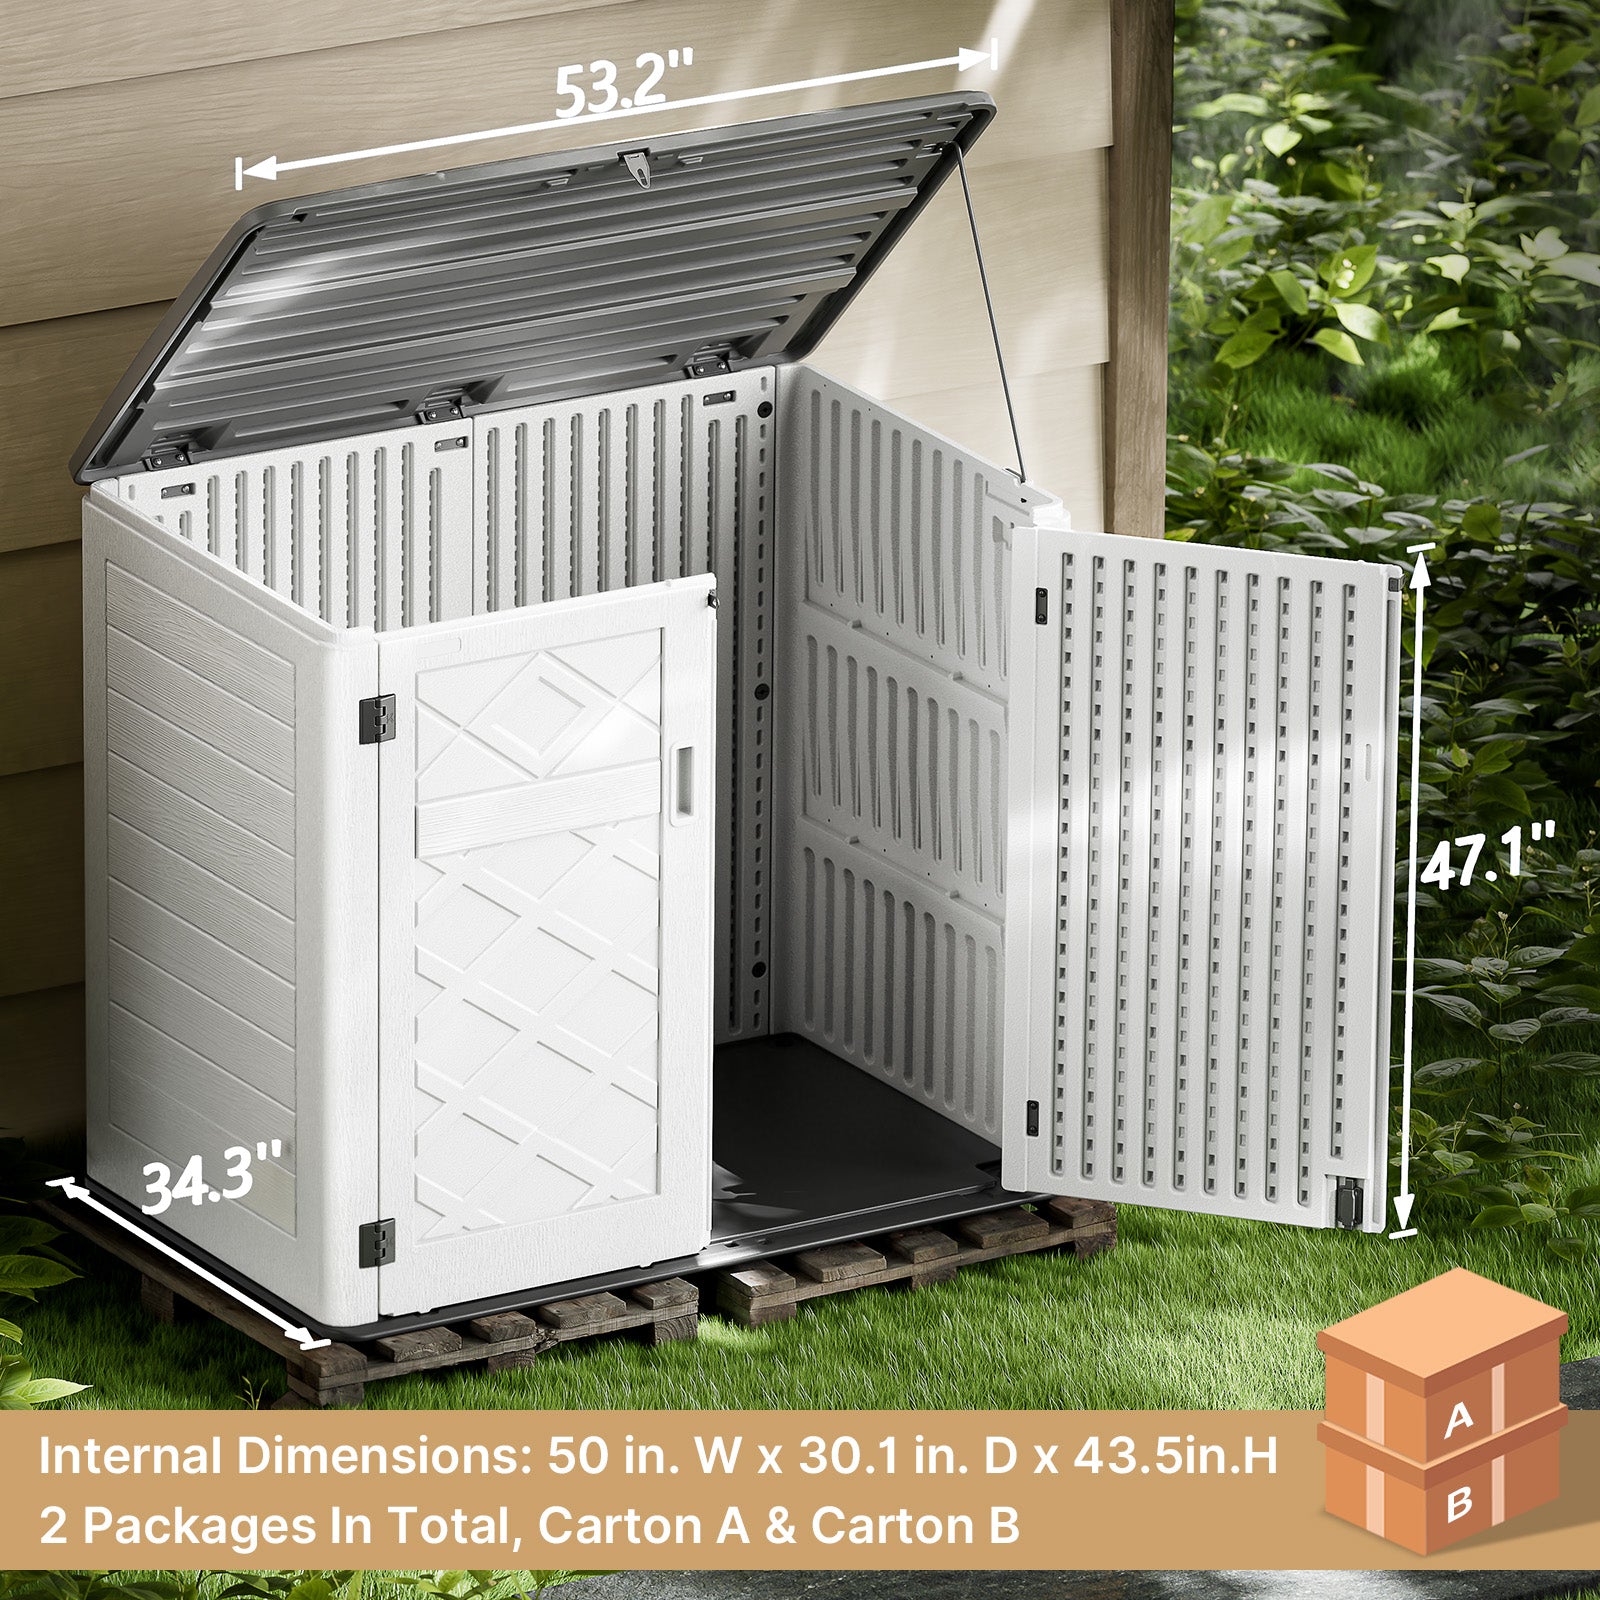 Gizoon CC60 Outdoor Resin Storage Shed with Reinforced Floor and Double Lockable Doors